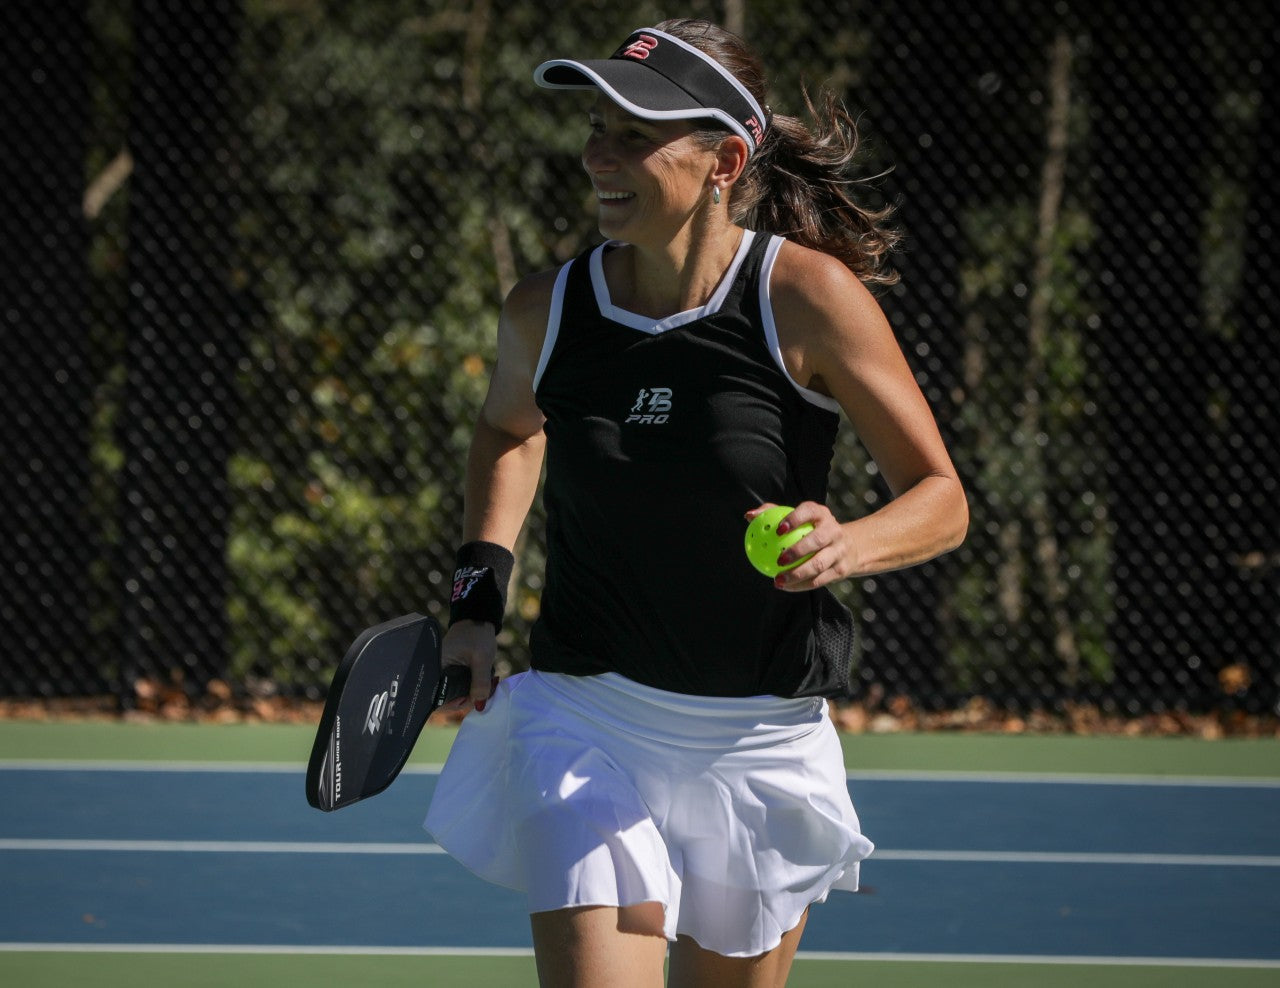 PBPRO's Chic Pickleball Skirts Empower Women to Dominate with Flair